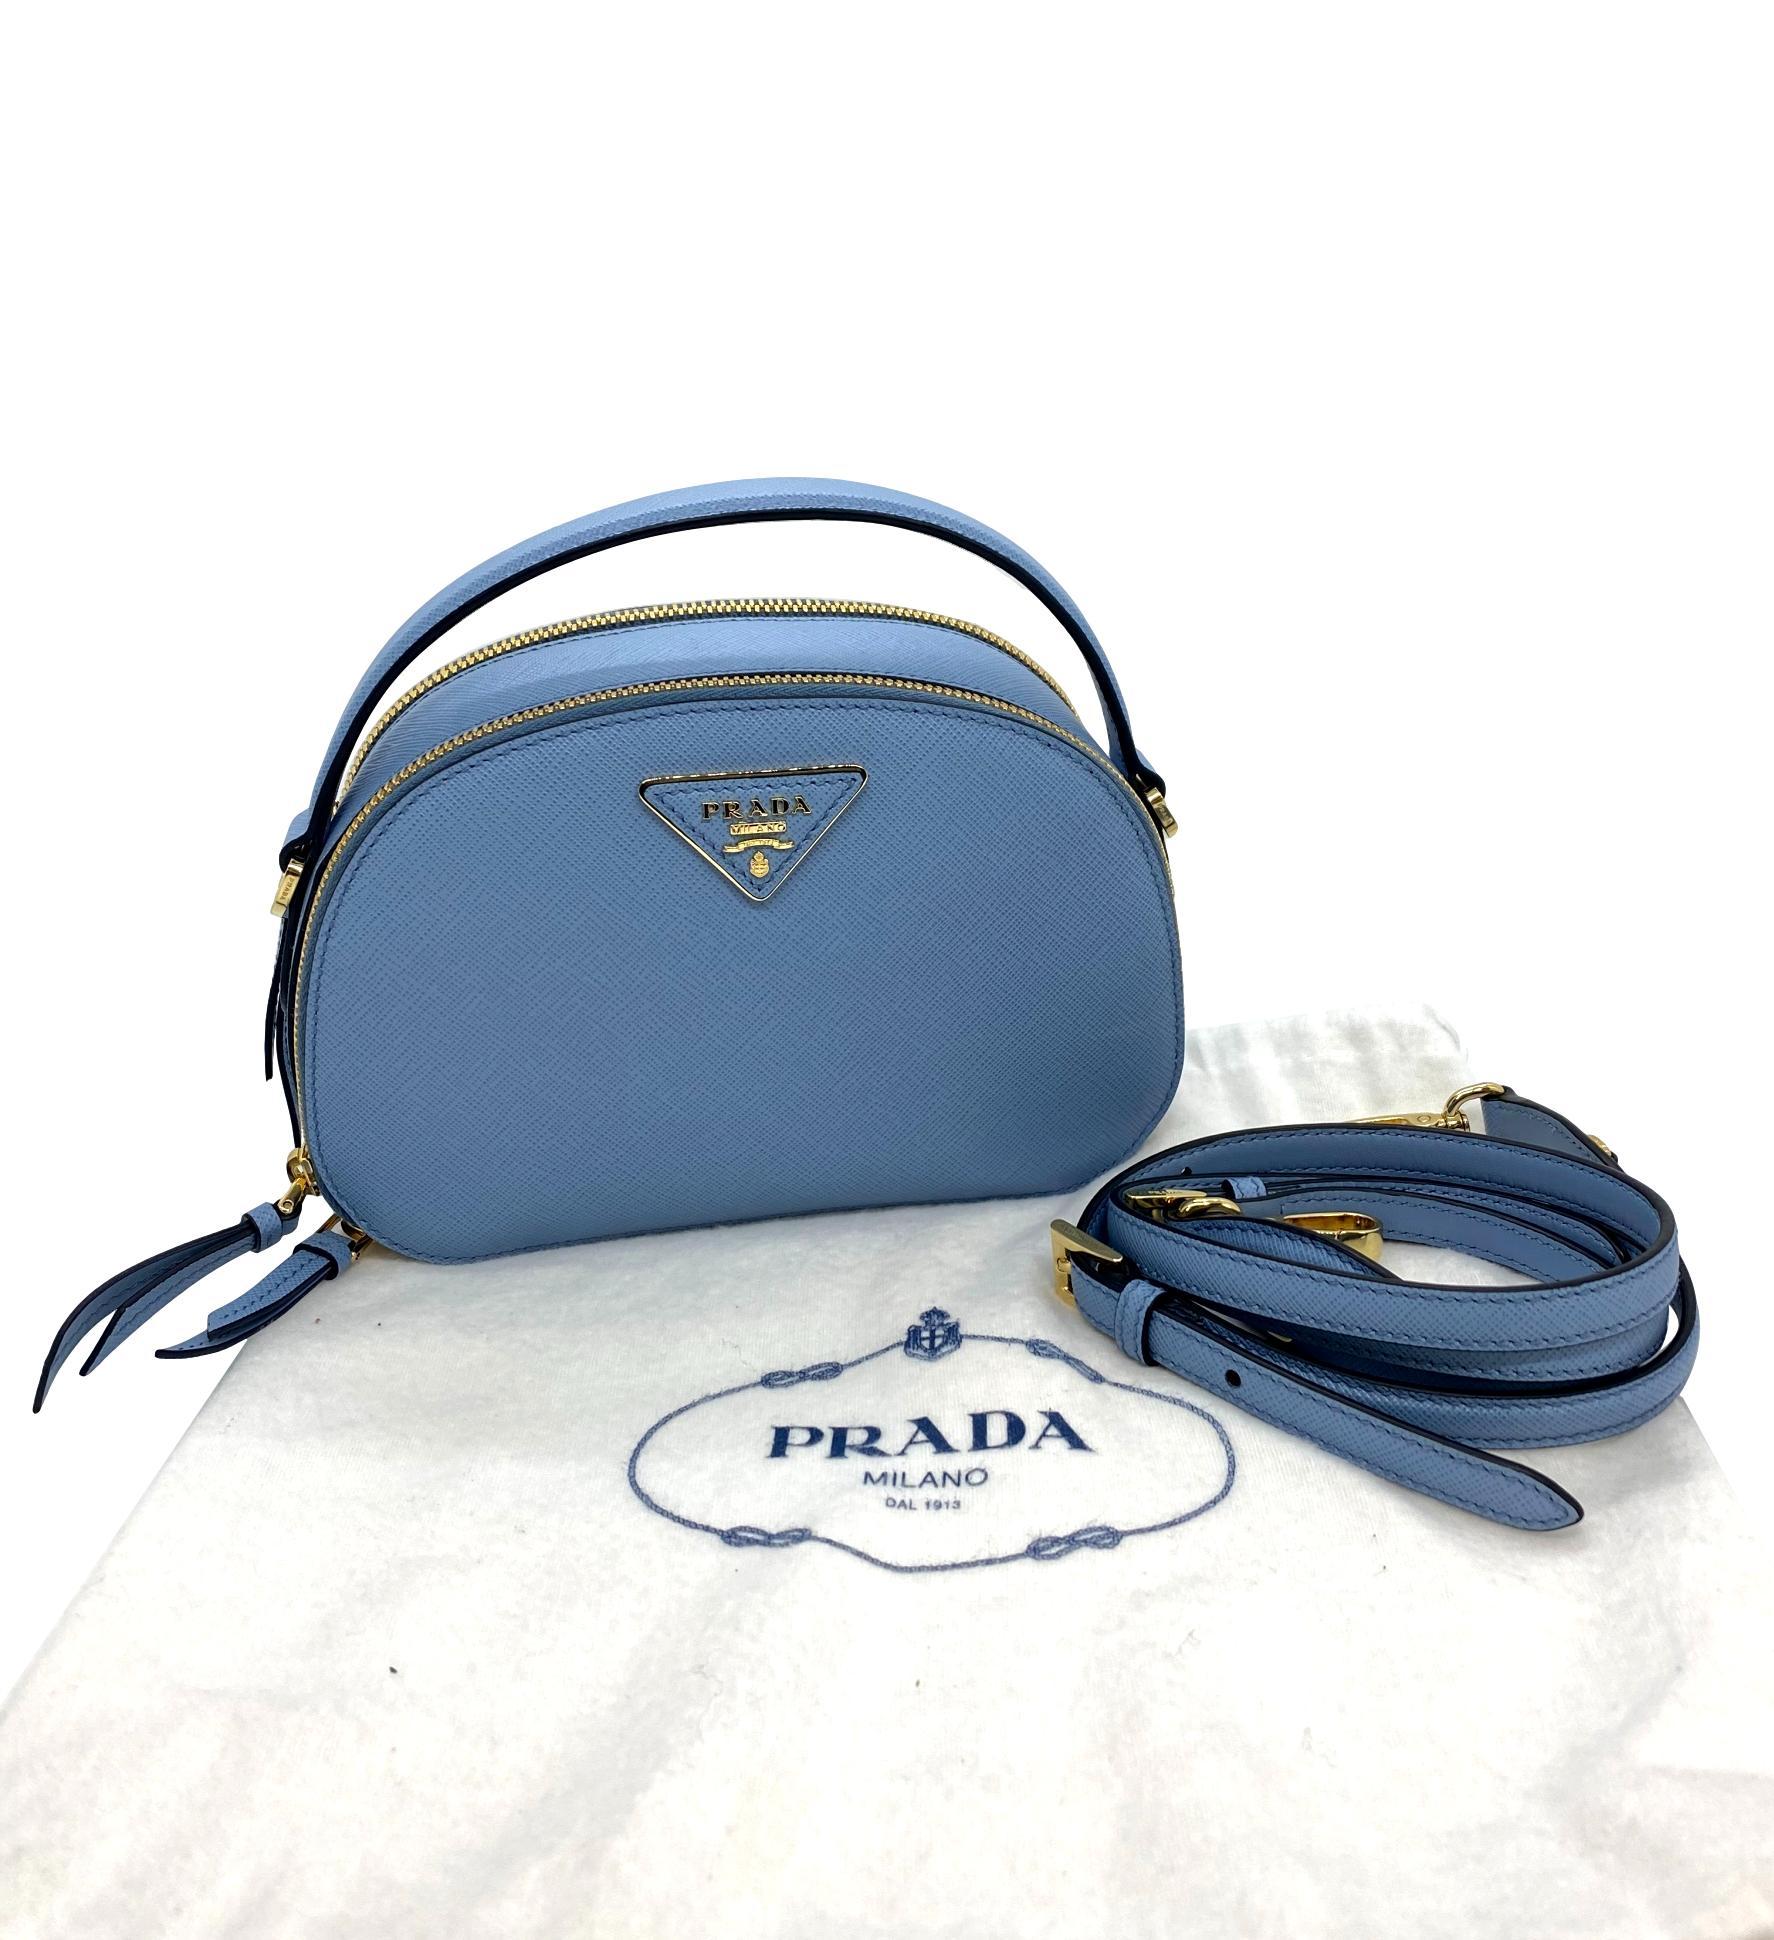 Prada Light Blue Saffiano Leather Odette Top Handle Cross-body Bag, 2020. Inspired by photographer's camera cases, the rounded shape of Prada's Odette bag is classic yet trendy for the new year. This bag was hand crafted in Italy from Prada's